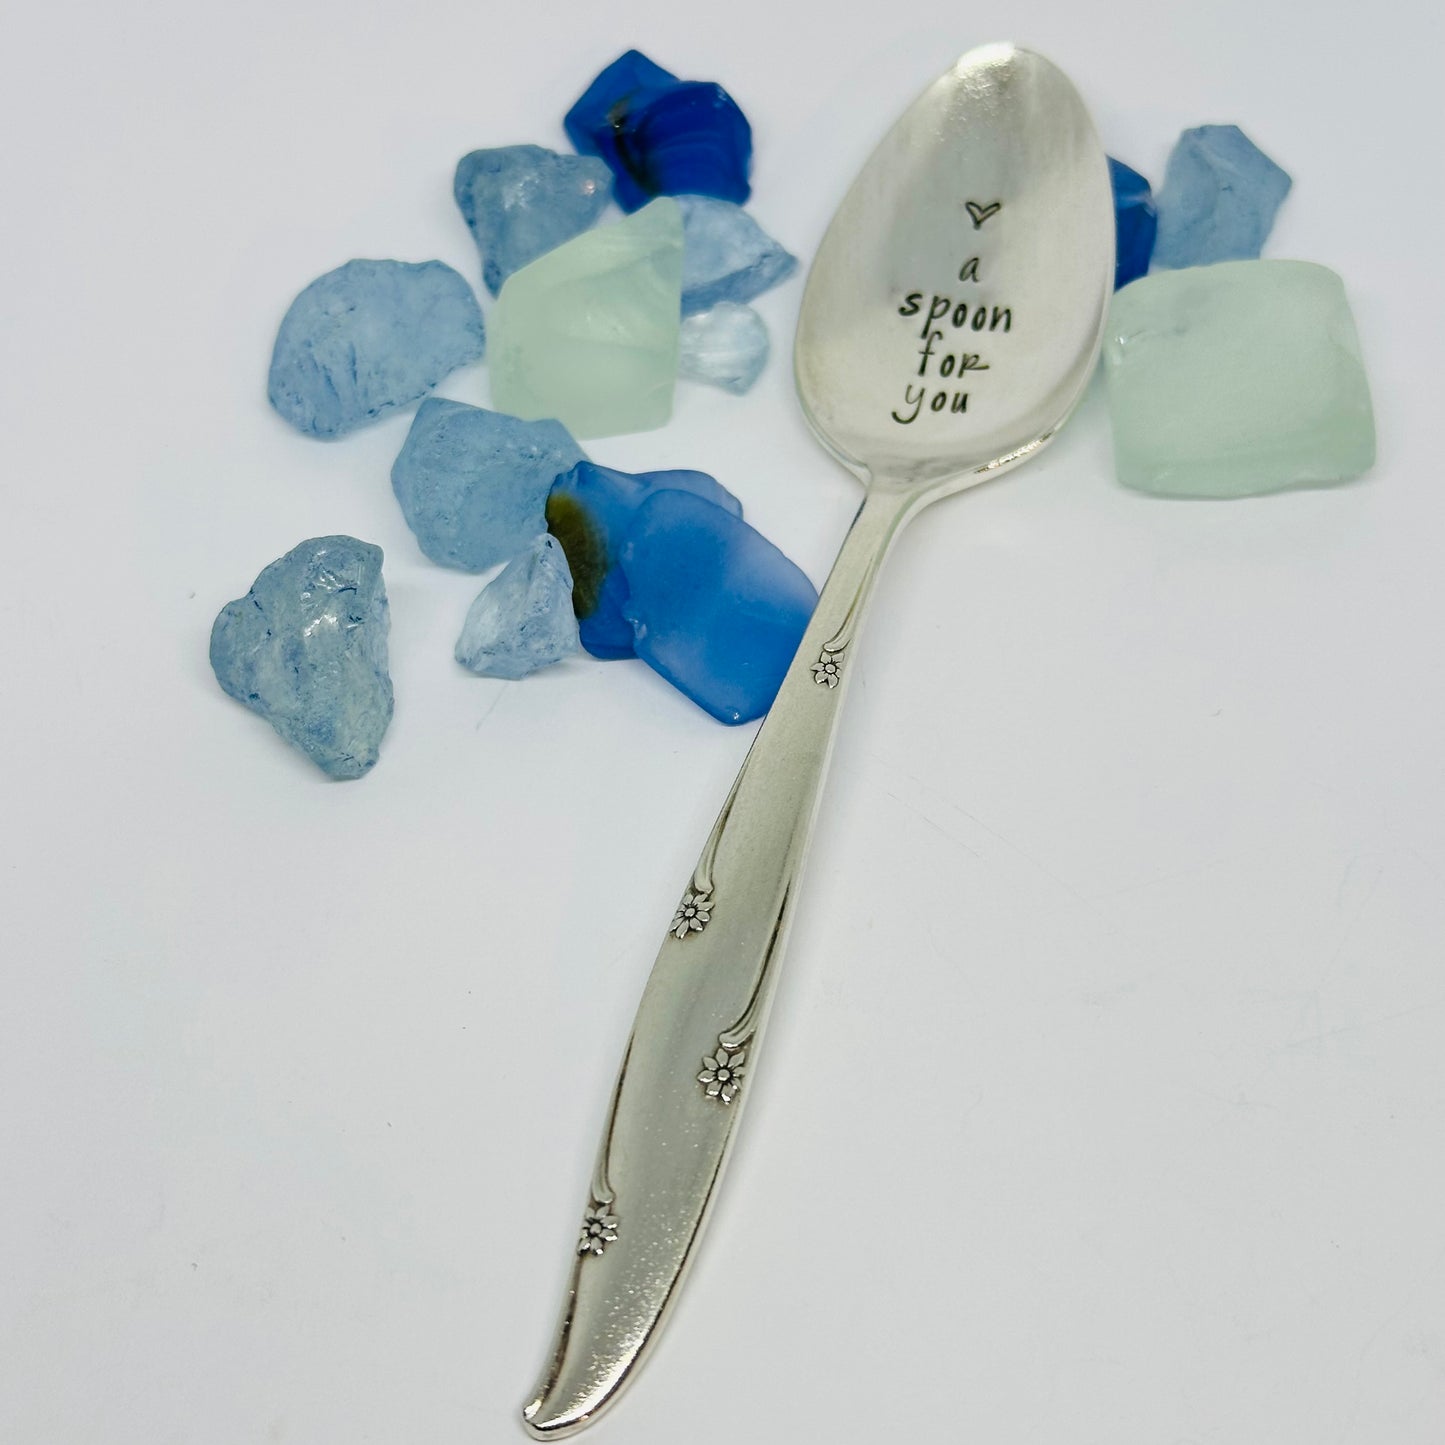 “A Spoon for You" Vintage Silverplated Hand Stamped Spoon | Novelty | Spoonies | Spoon Theory | Chronic Illness | Disability